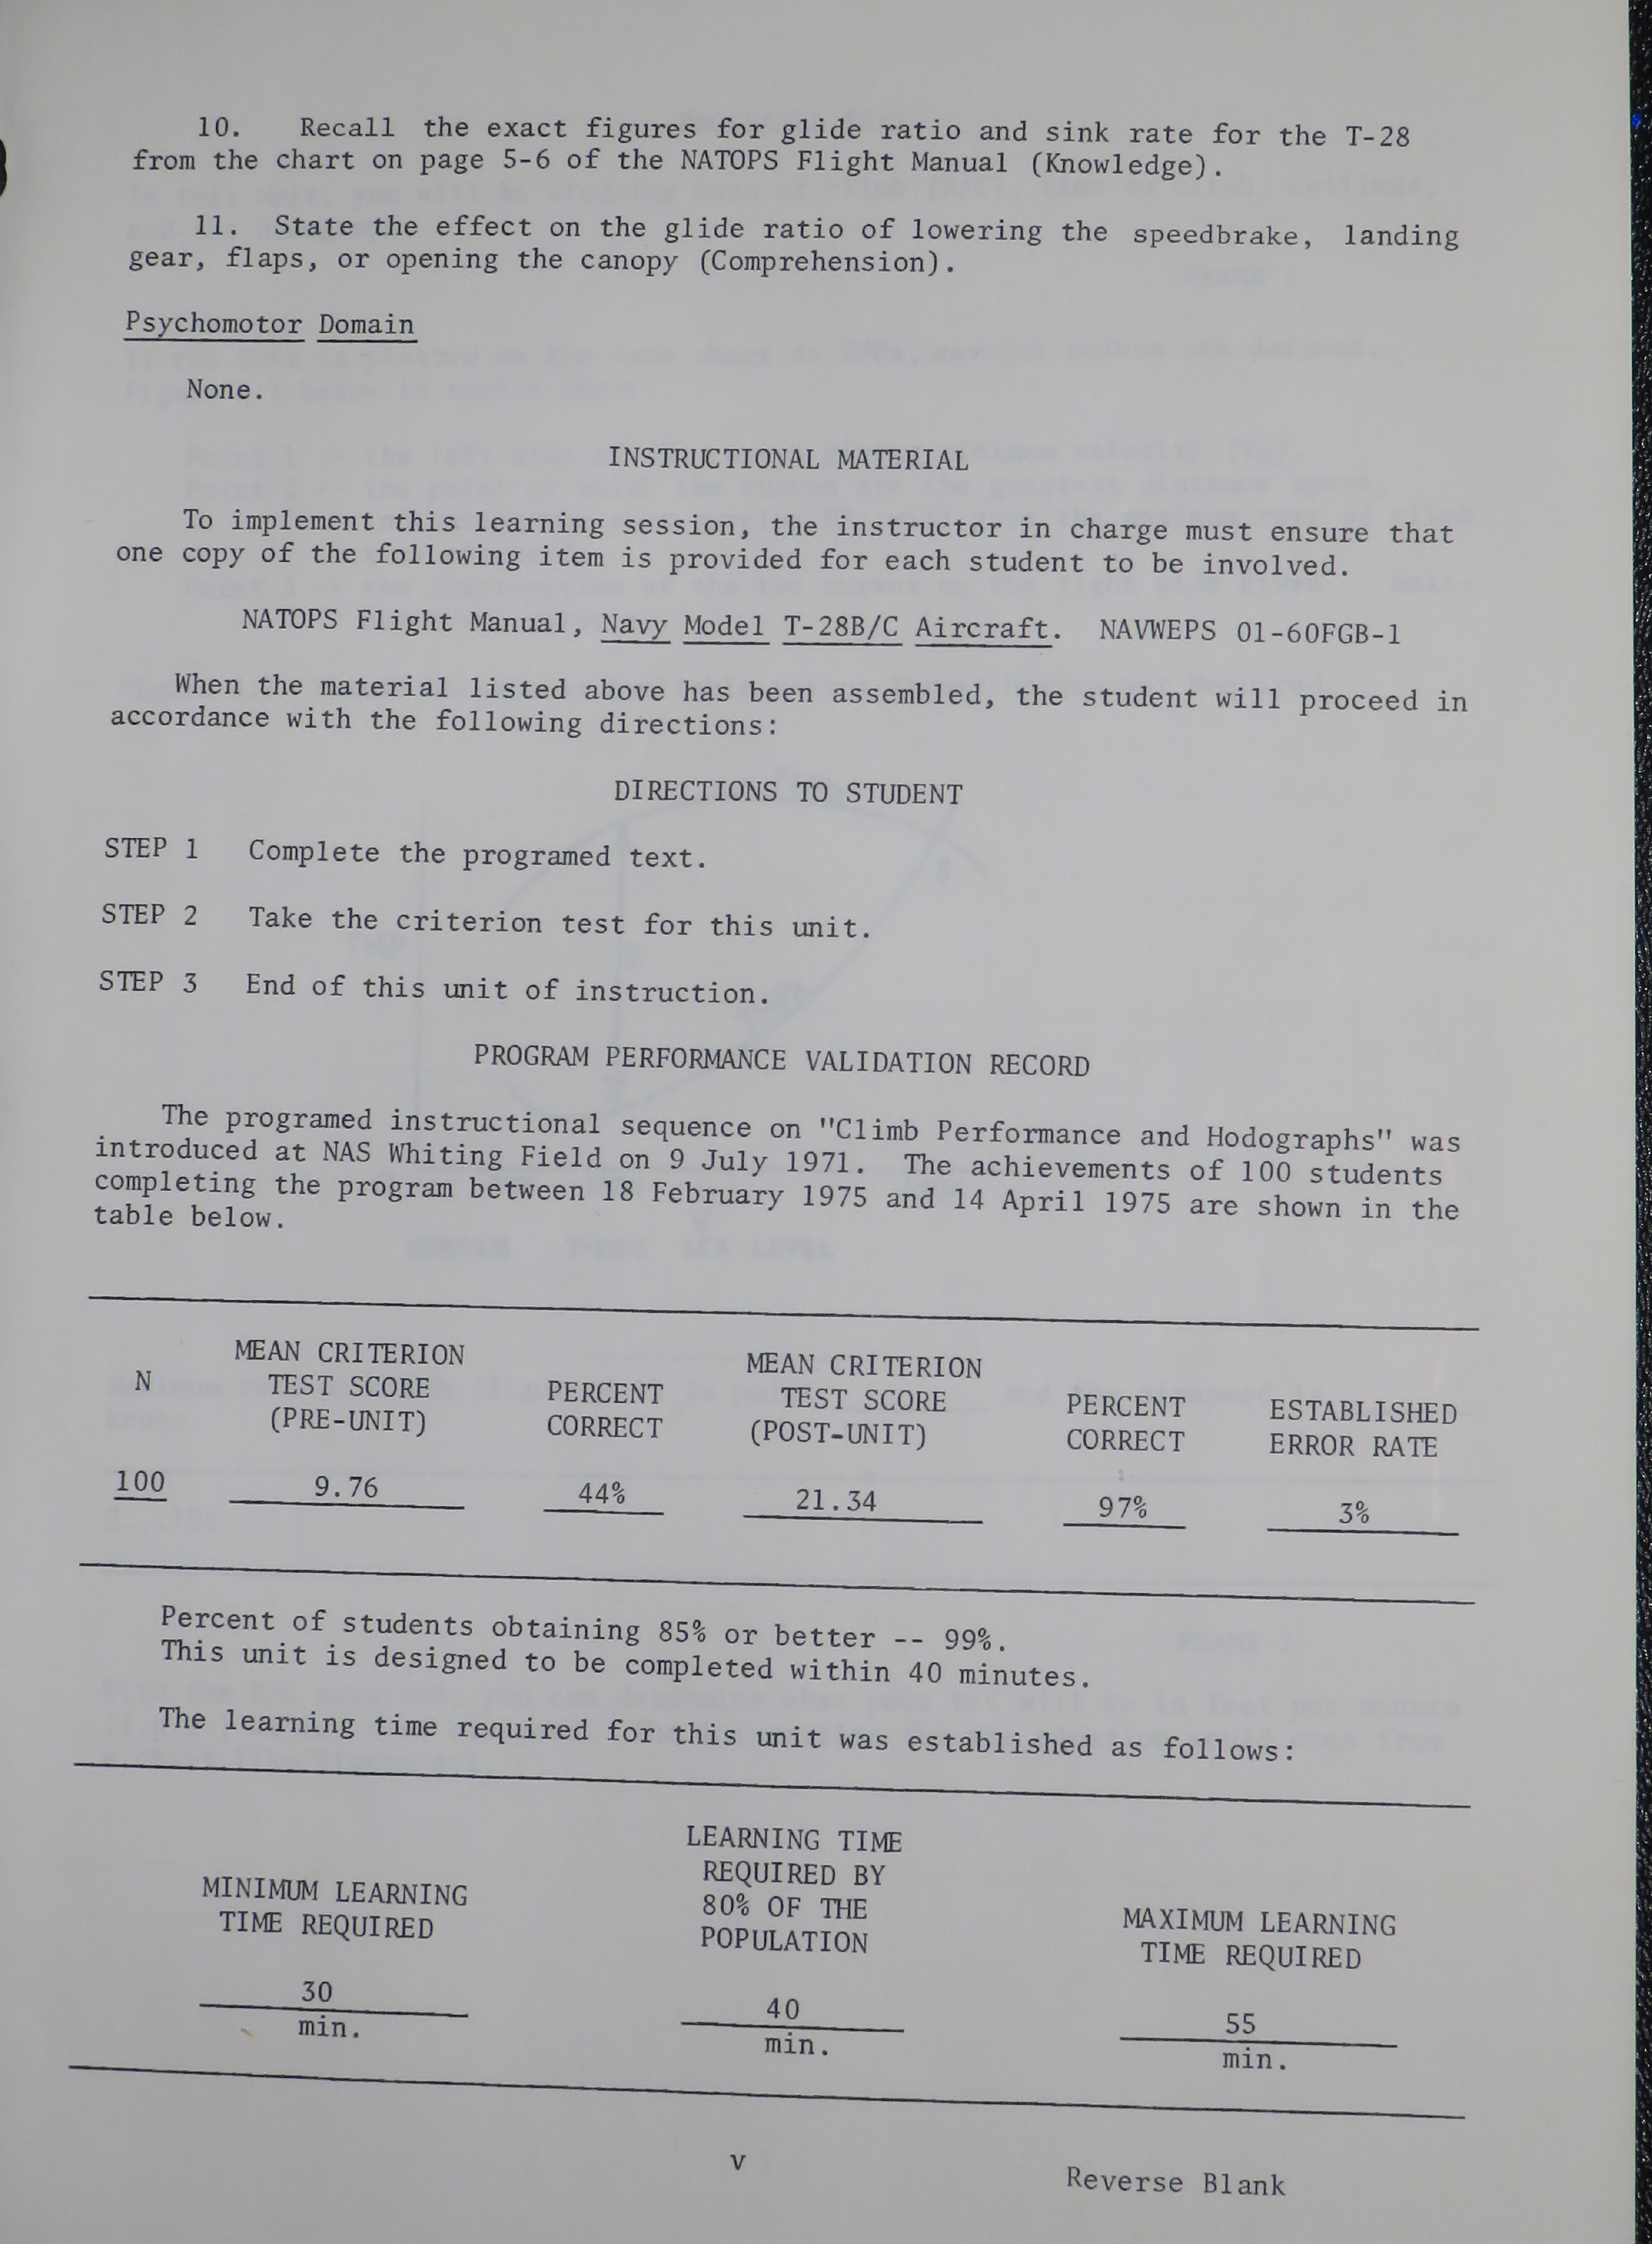 Sample page 5 from AirCorps Library document: Climb Performance and Hodographs